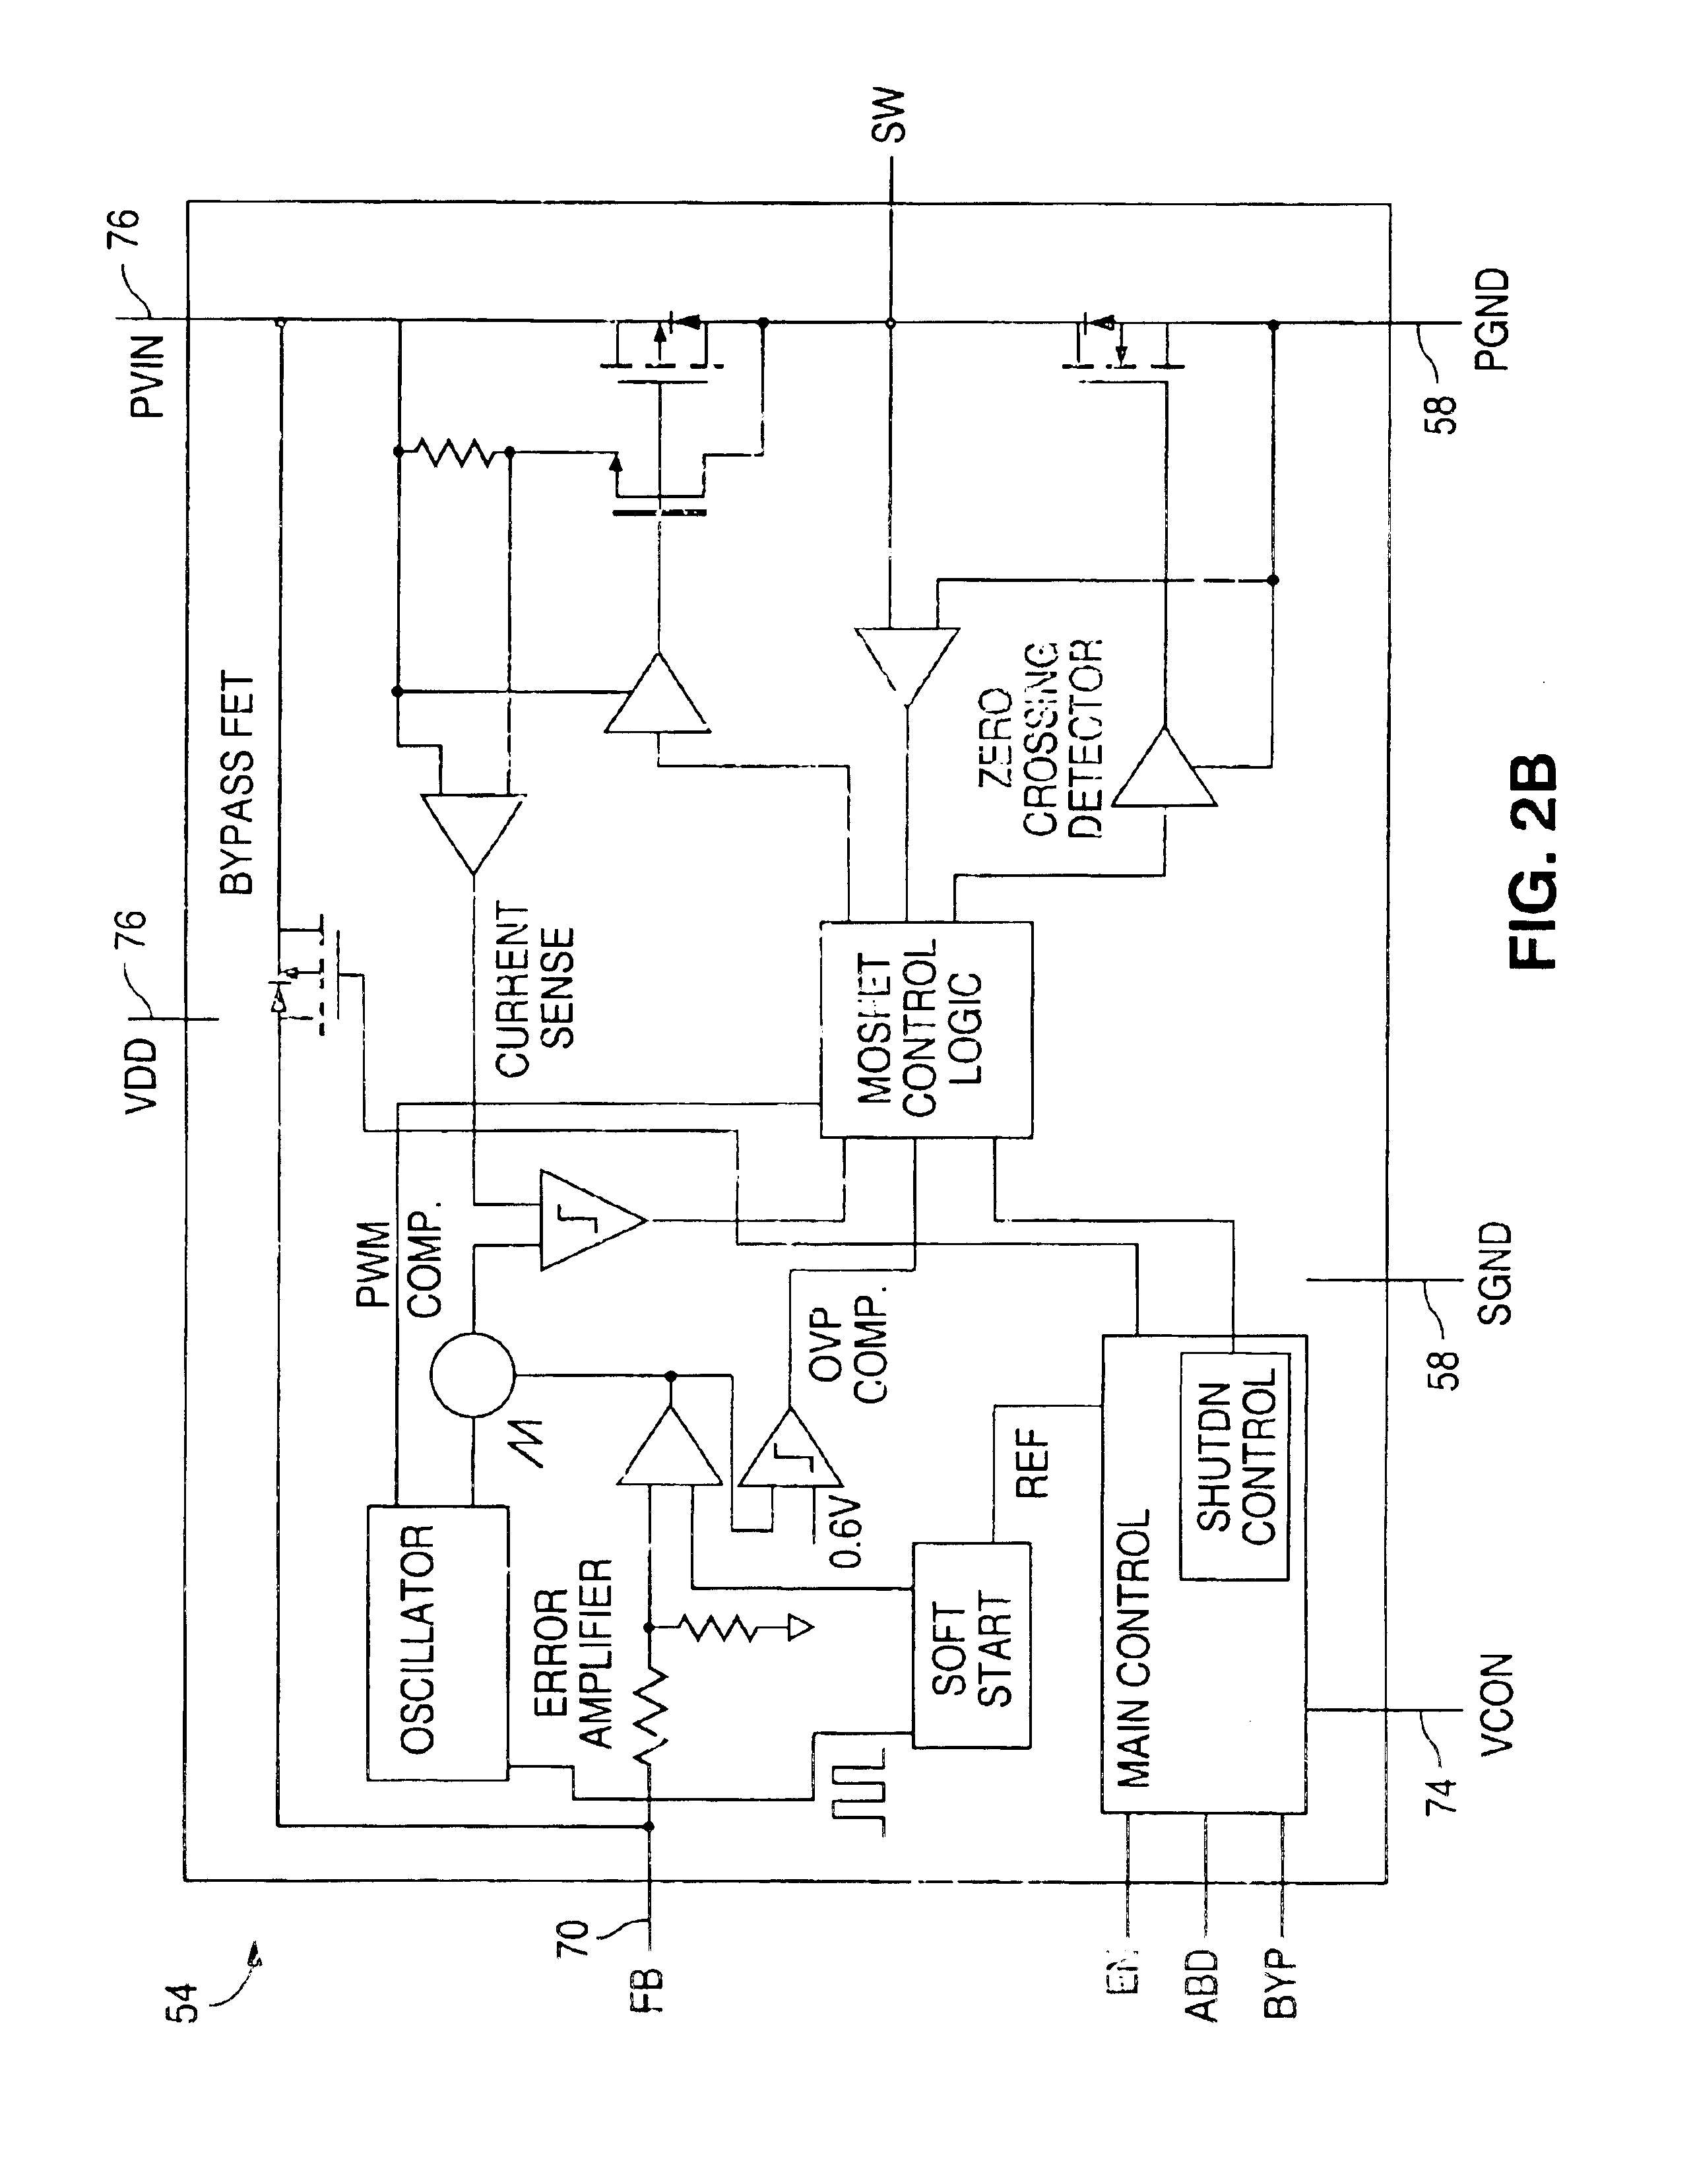 Method and system for providing power management in a radio frequency power amplifier by dynamically adjusting supply and bias conditions